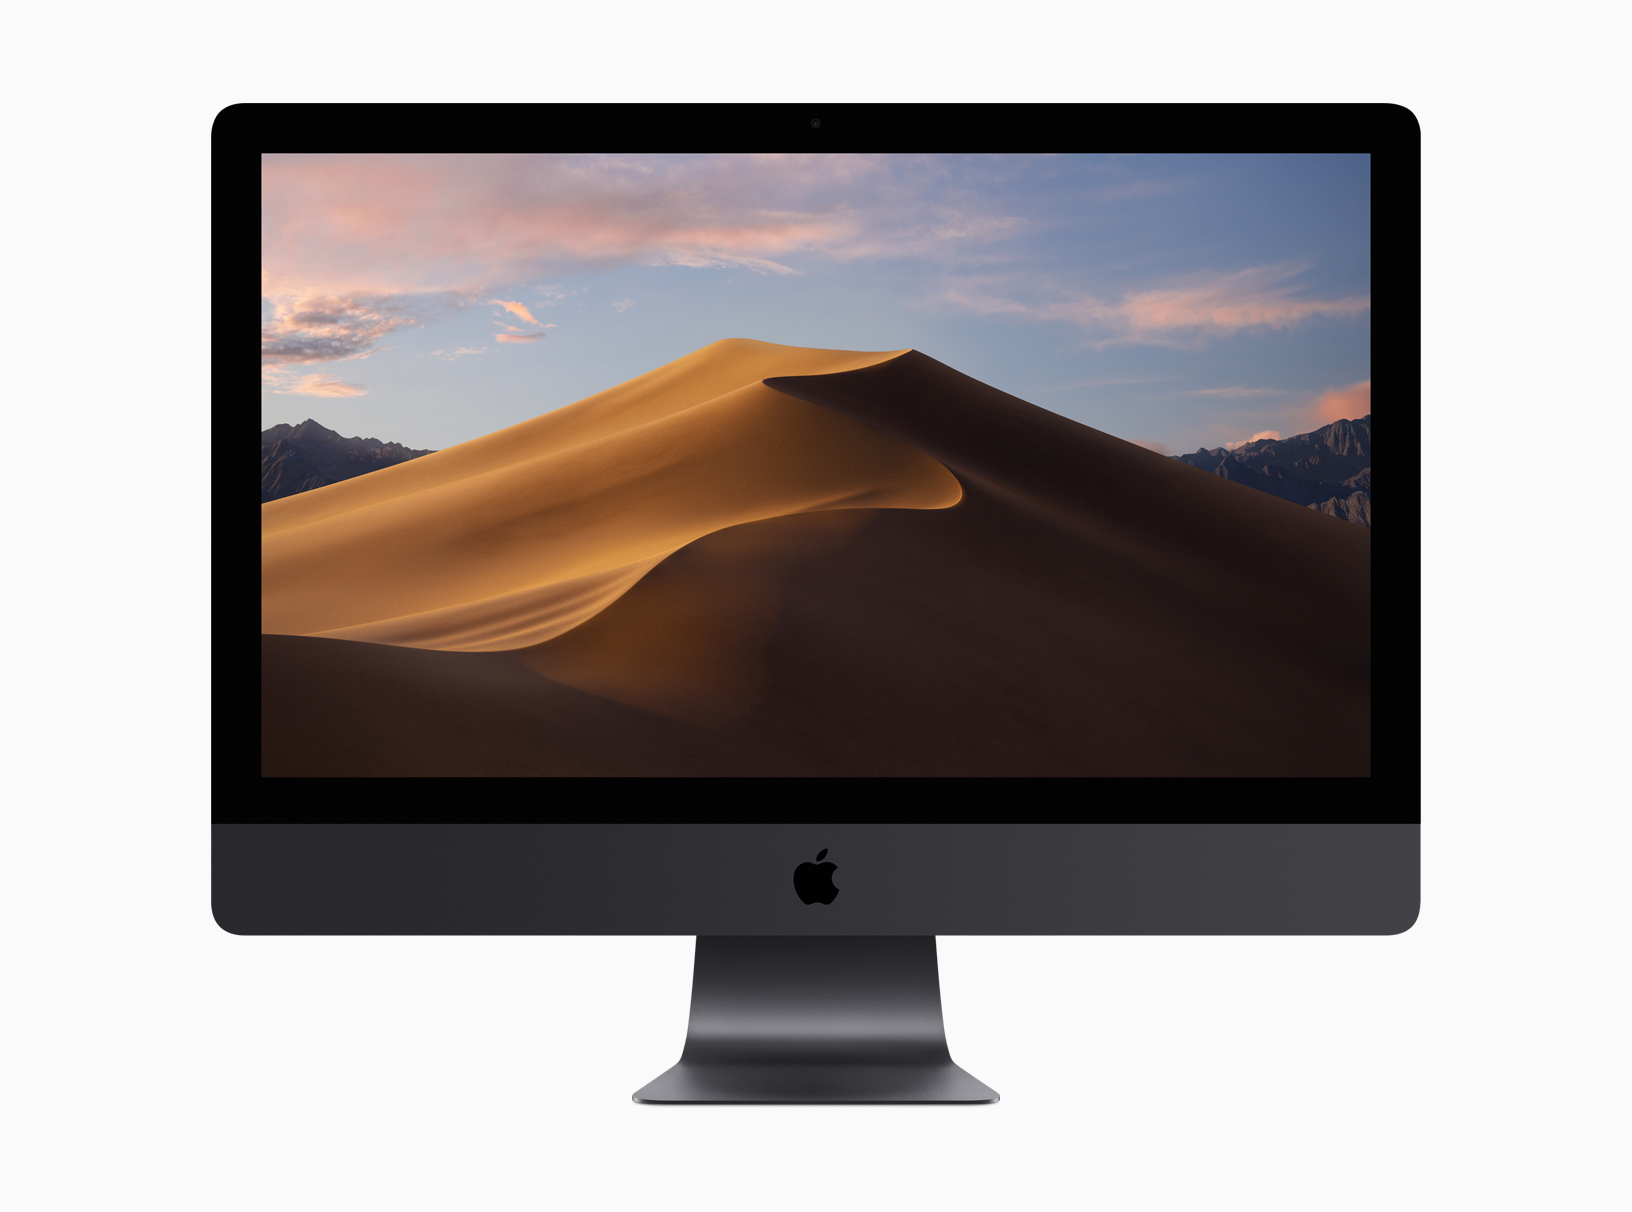 Mojave download the last version for ios